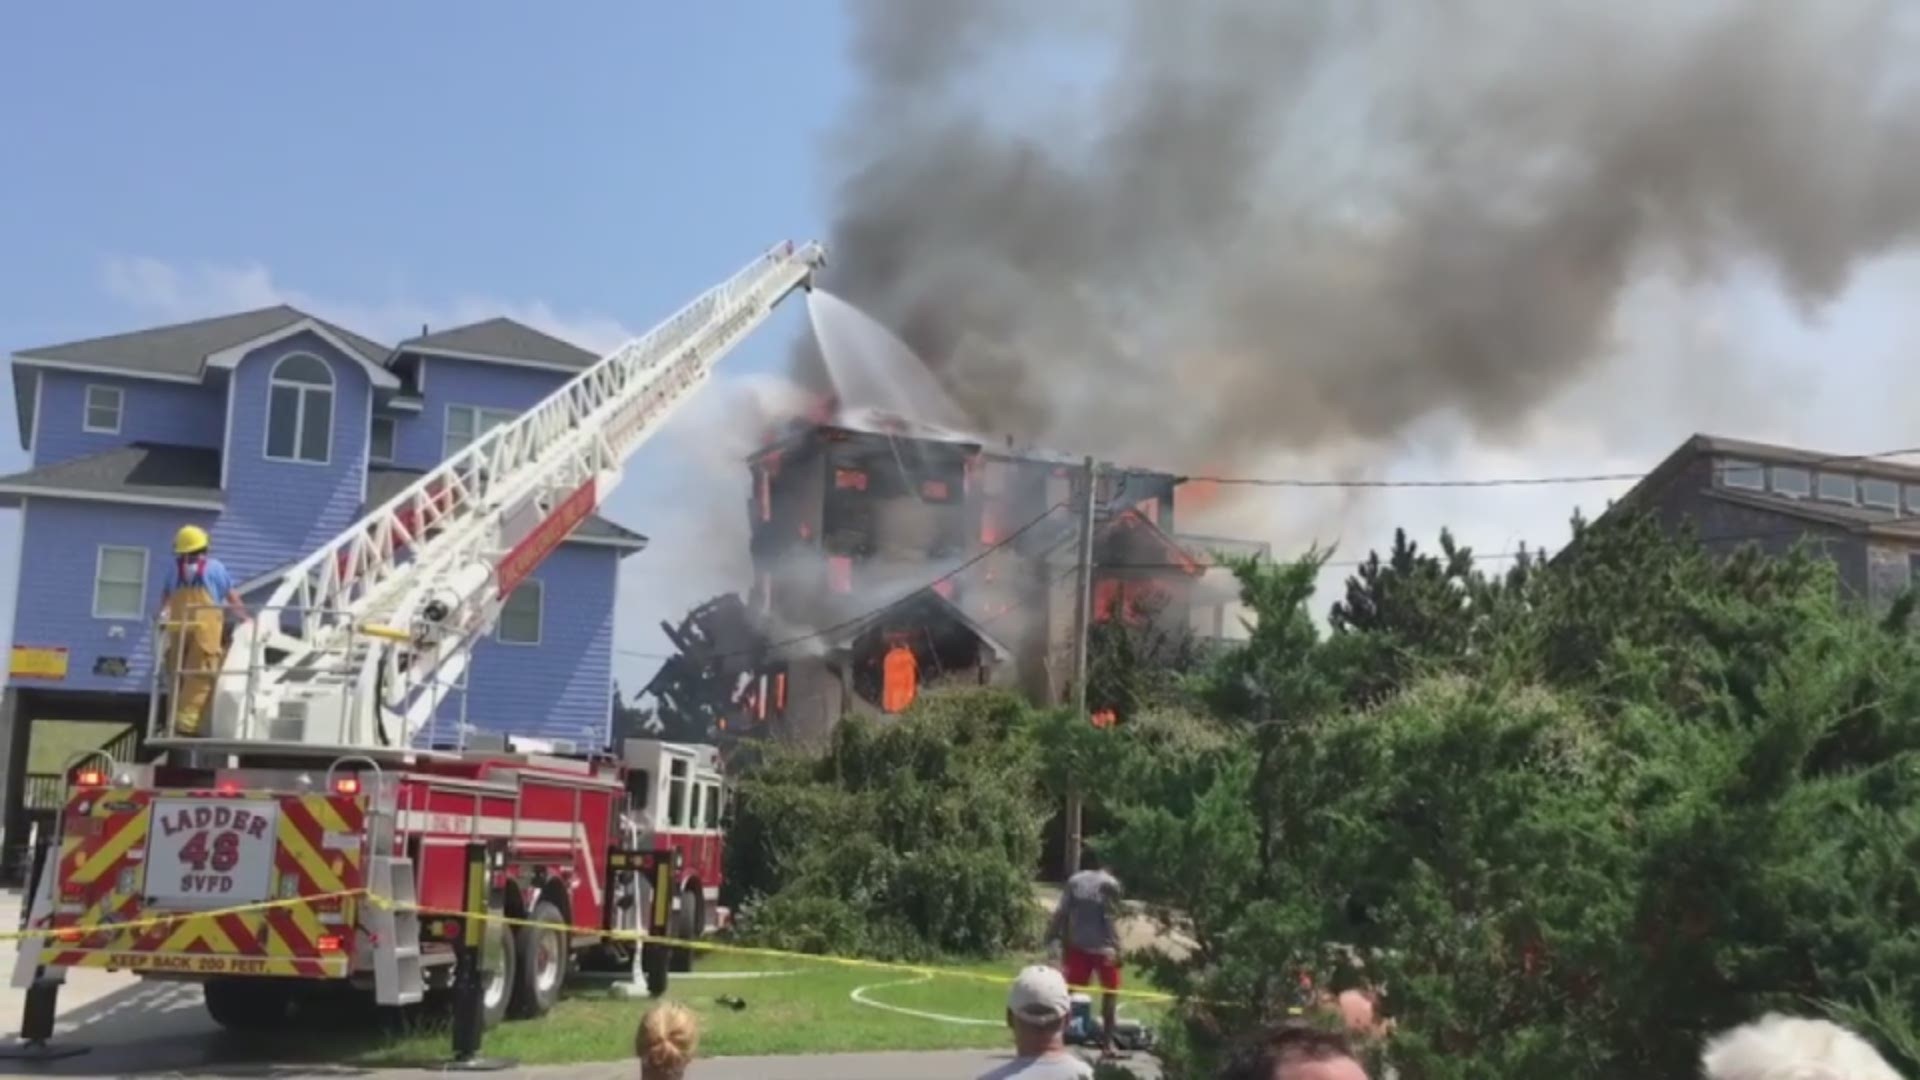 A beachfront home on Hatteras Island suffered heavy damage following a fire on Thursday afternoon. Video courtesy Elliot Feinstein